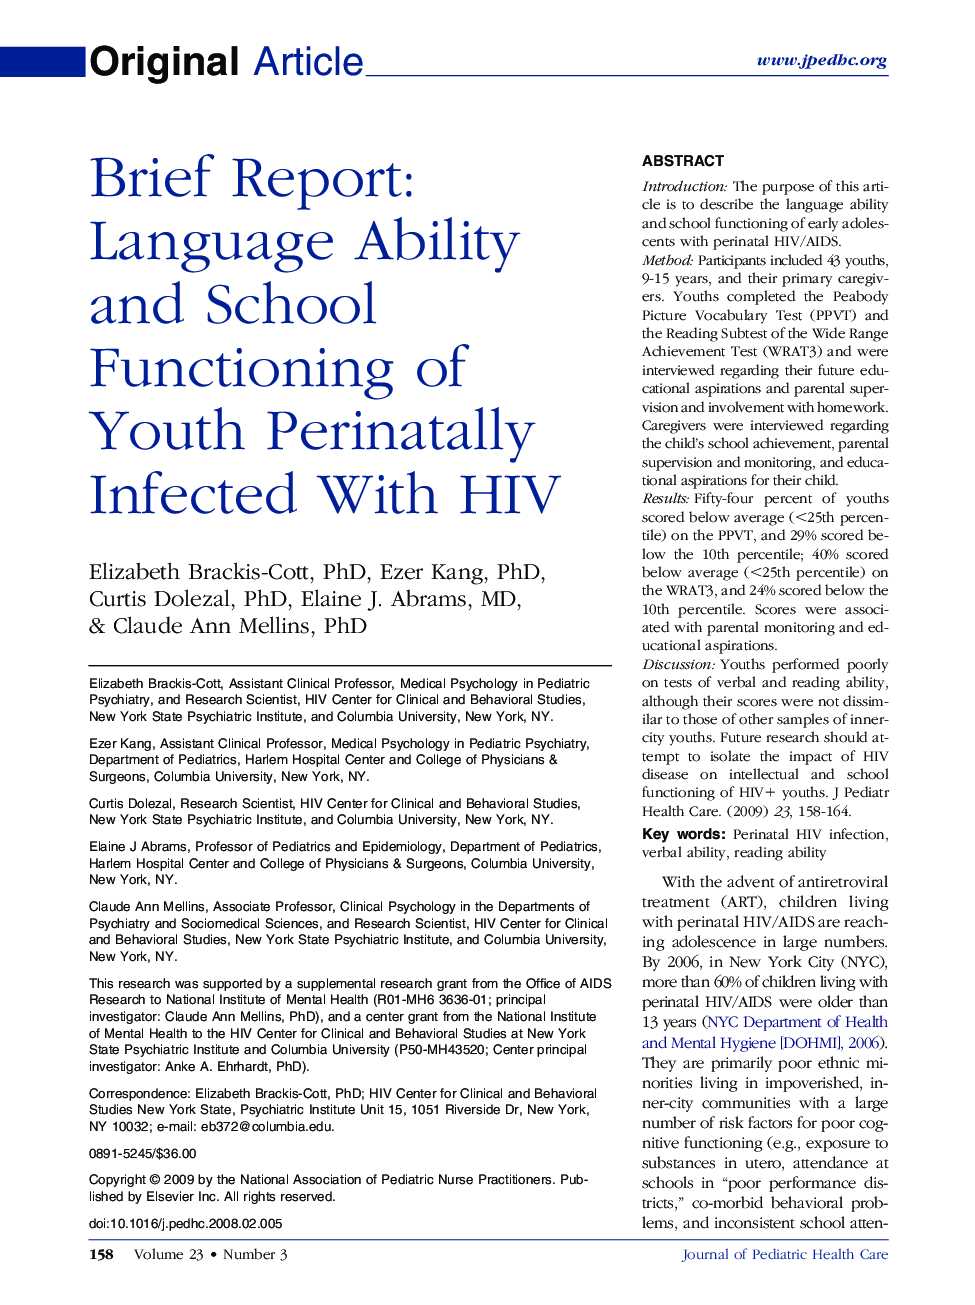 Brief Report: Language Ability and School Functioning of Youth Perinatally Infected With HIV 